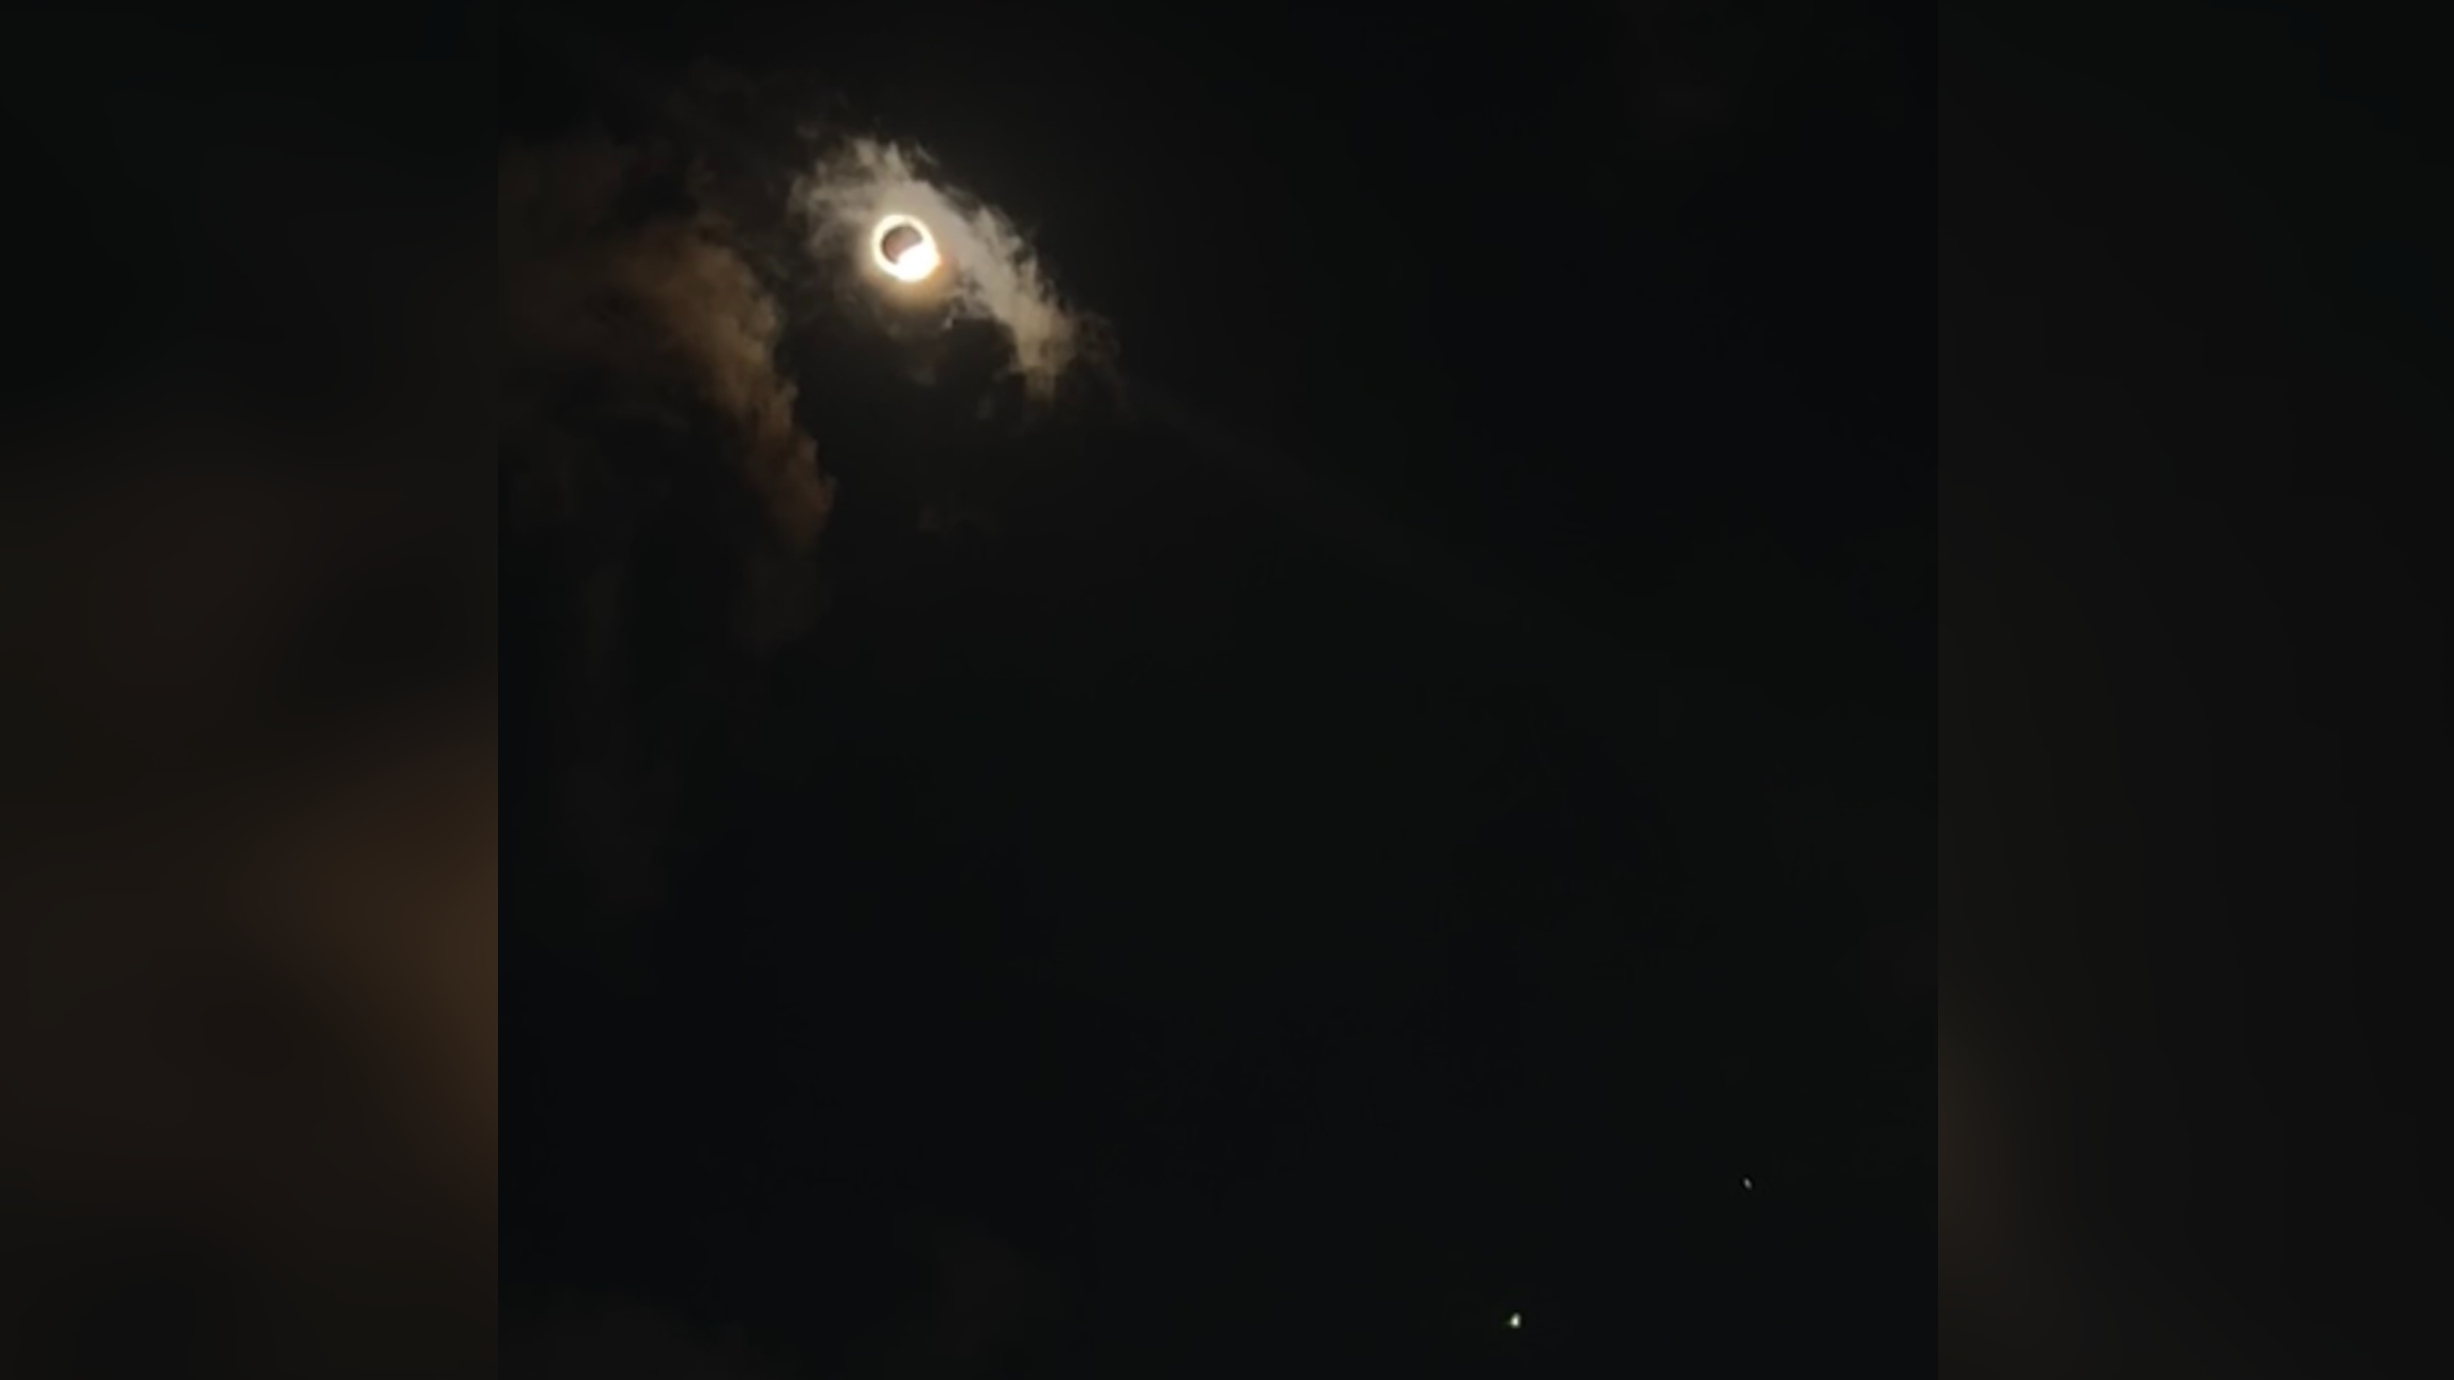 a bright point of light appears from behind the moon during the eclipse, making the scene look like a giant diamond ring in the sky.